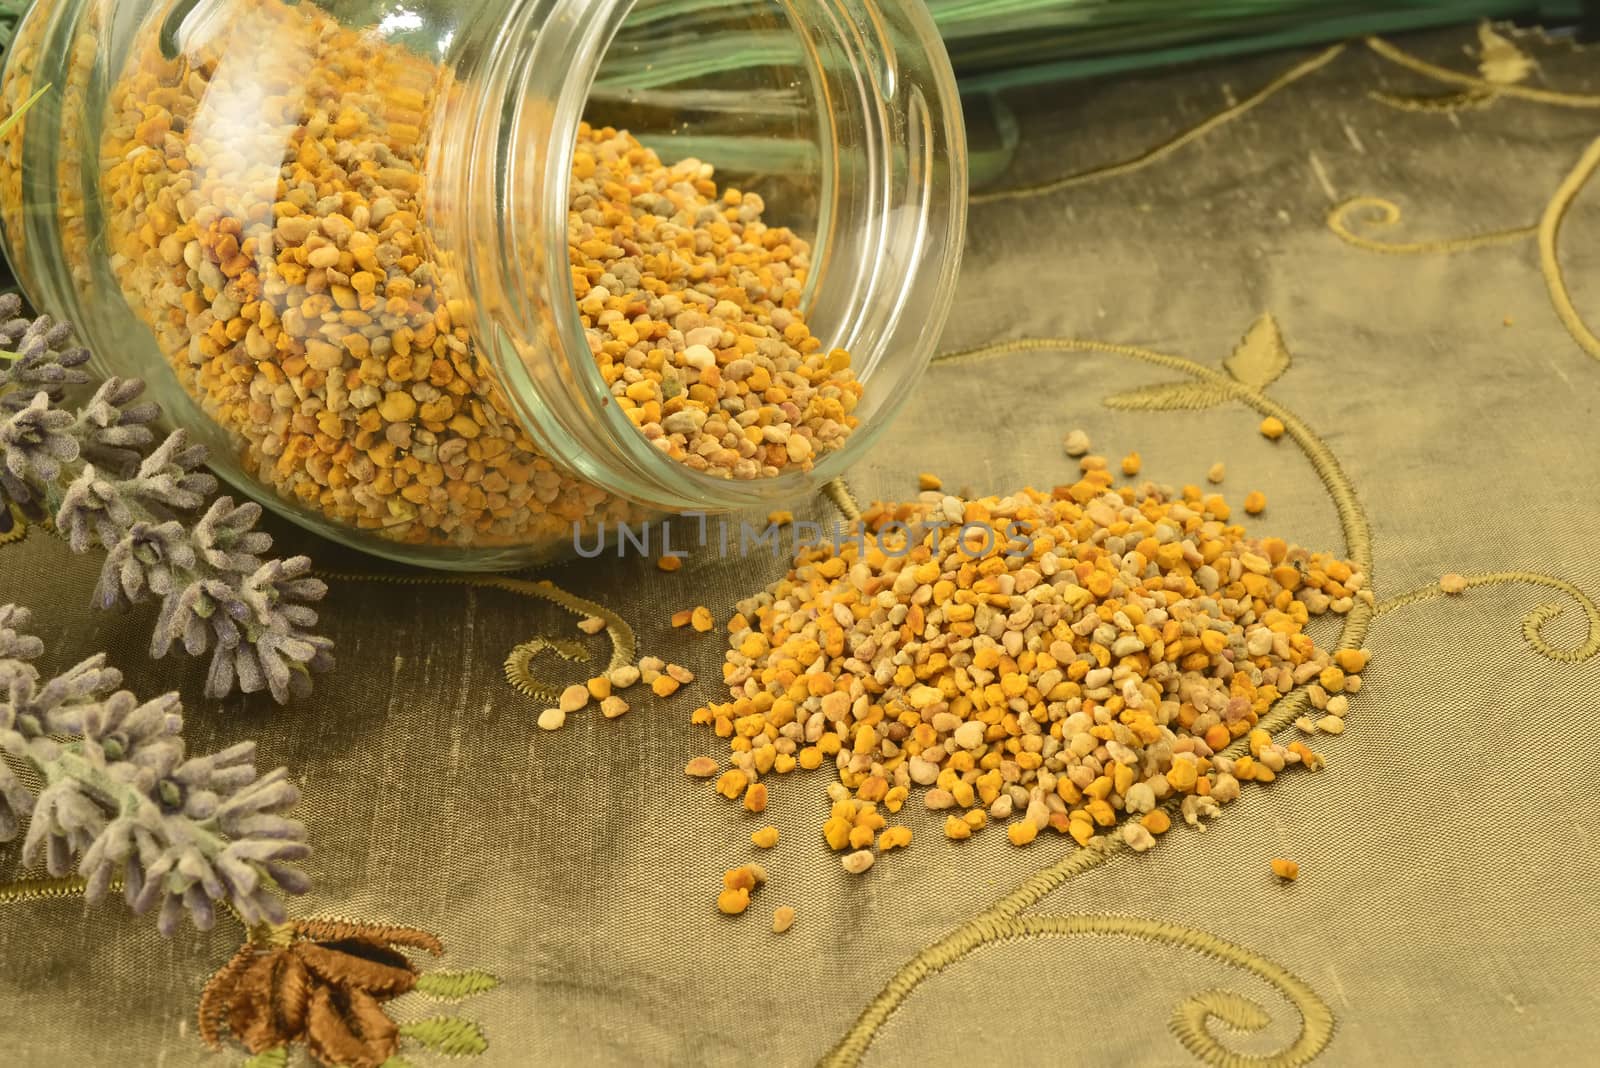 Bee pollen in glass jar and flowers on a tablecloth